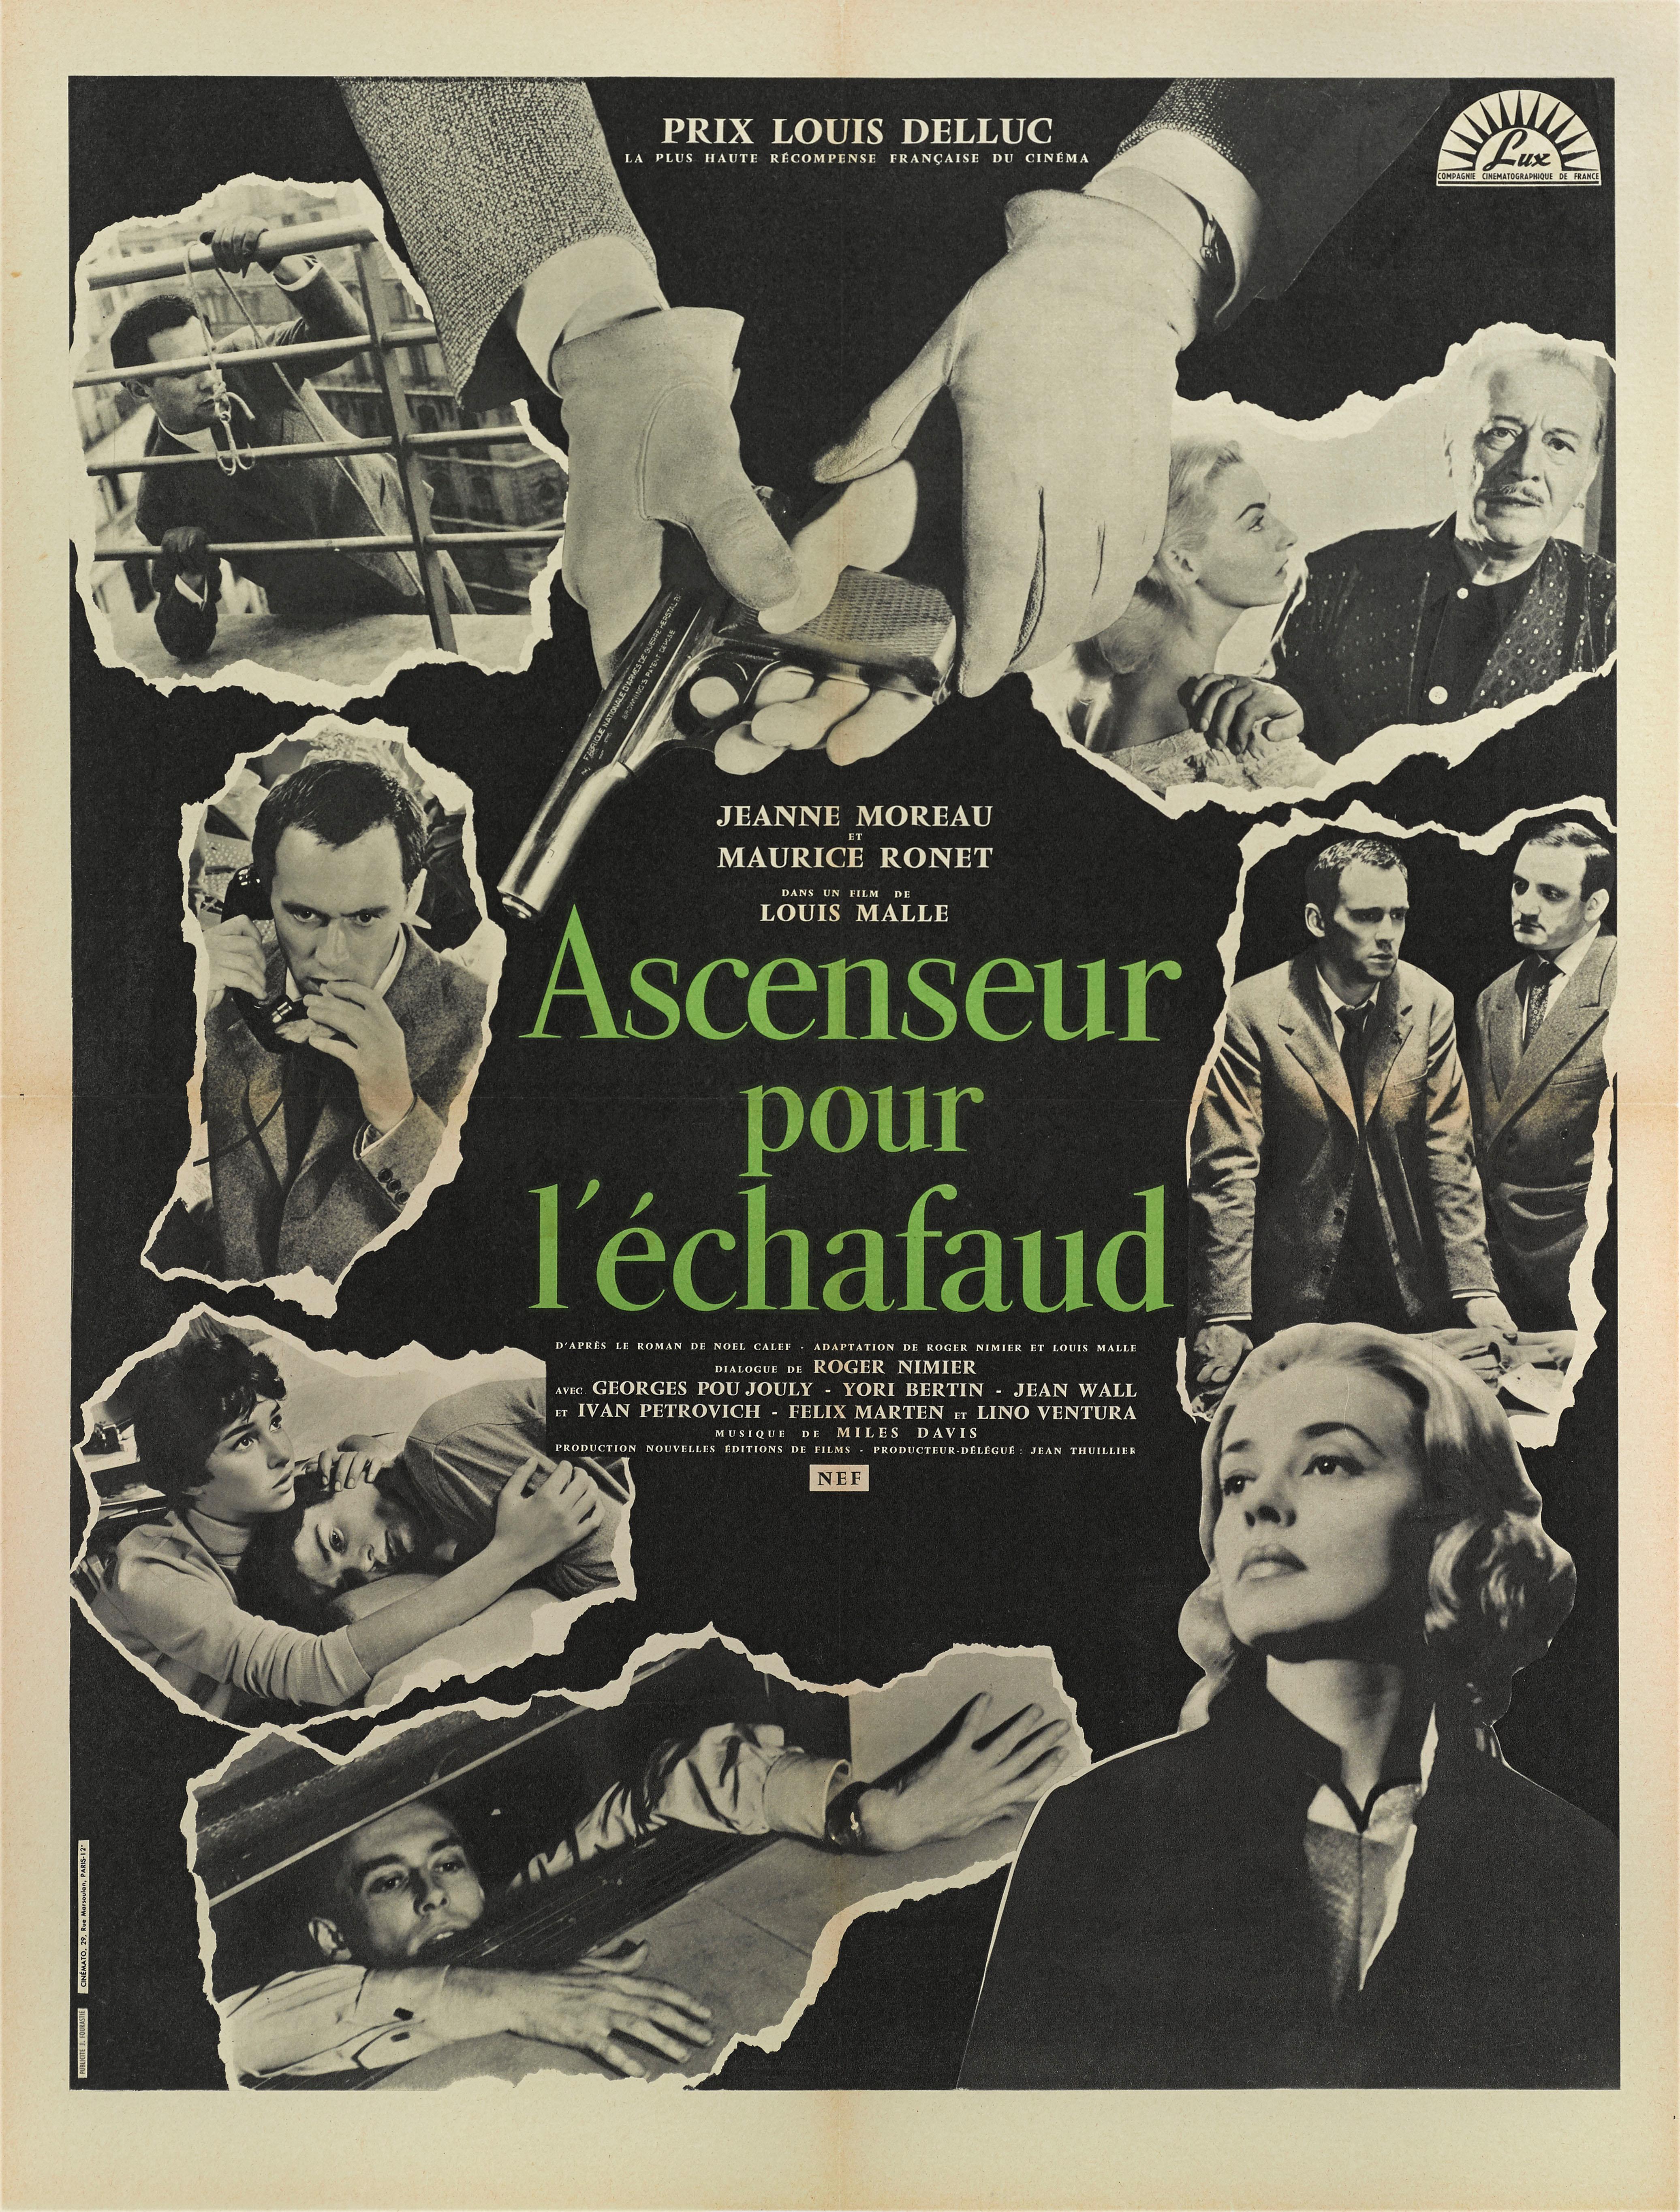 Original French Movie poster Louis Malle's 1958 French new wave film.
The poster is designed by Jacques Fourastie. This poster is conservation linen backed and it would be shipped in a very strong tube and sent by Federal Express.
